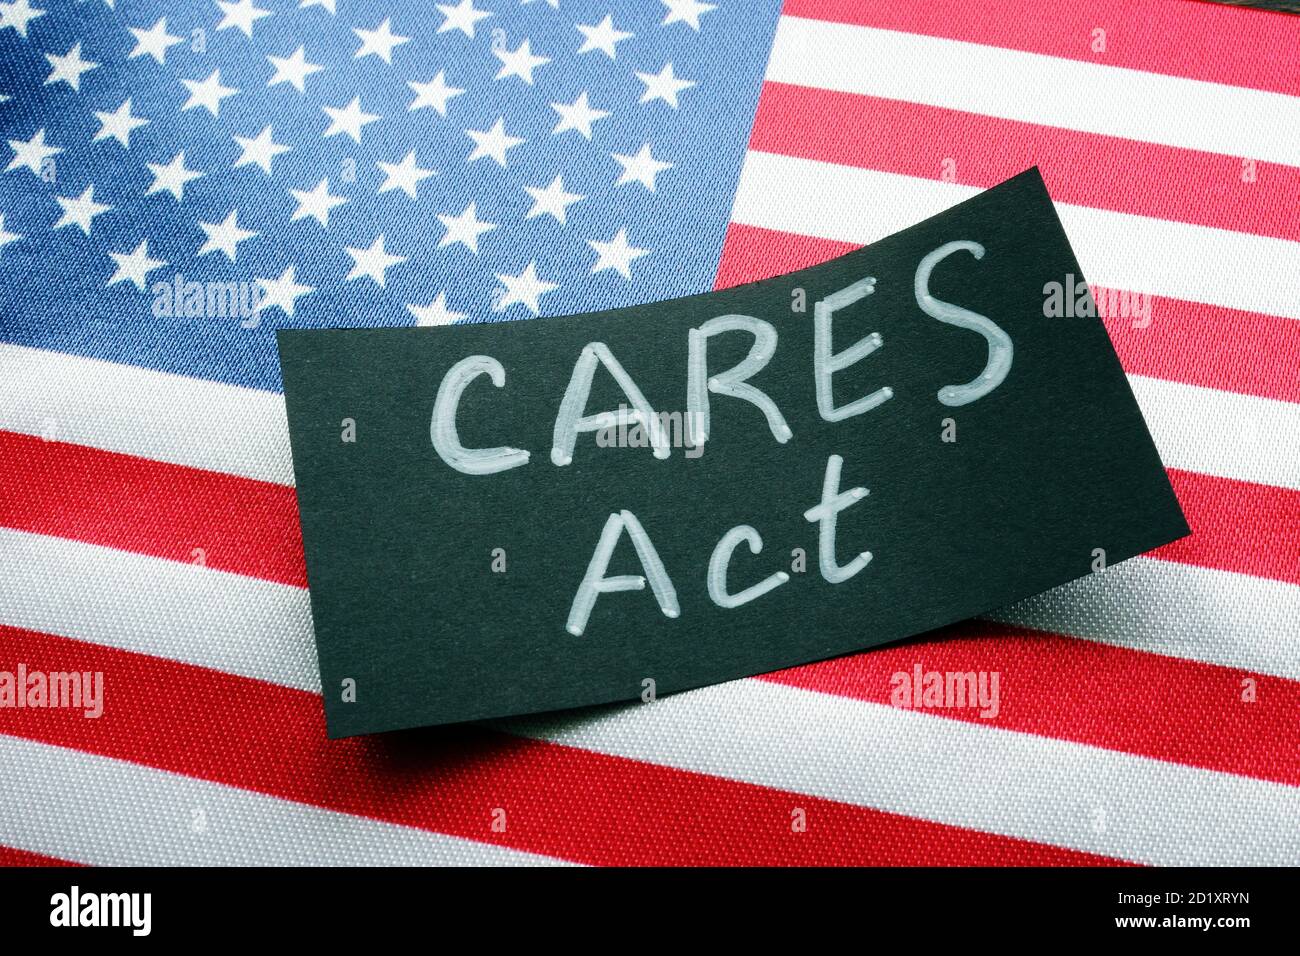 USA flag and word CARES act The Coronavirus Aid, Relief, and Economic Security Act. Stock Photo